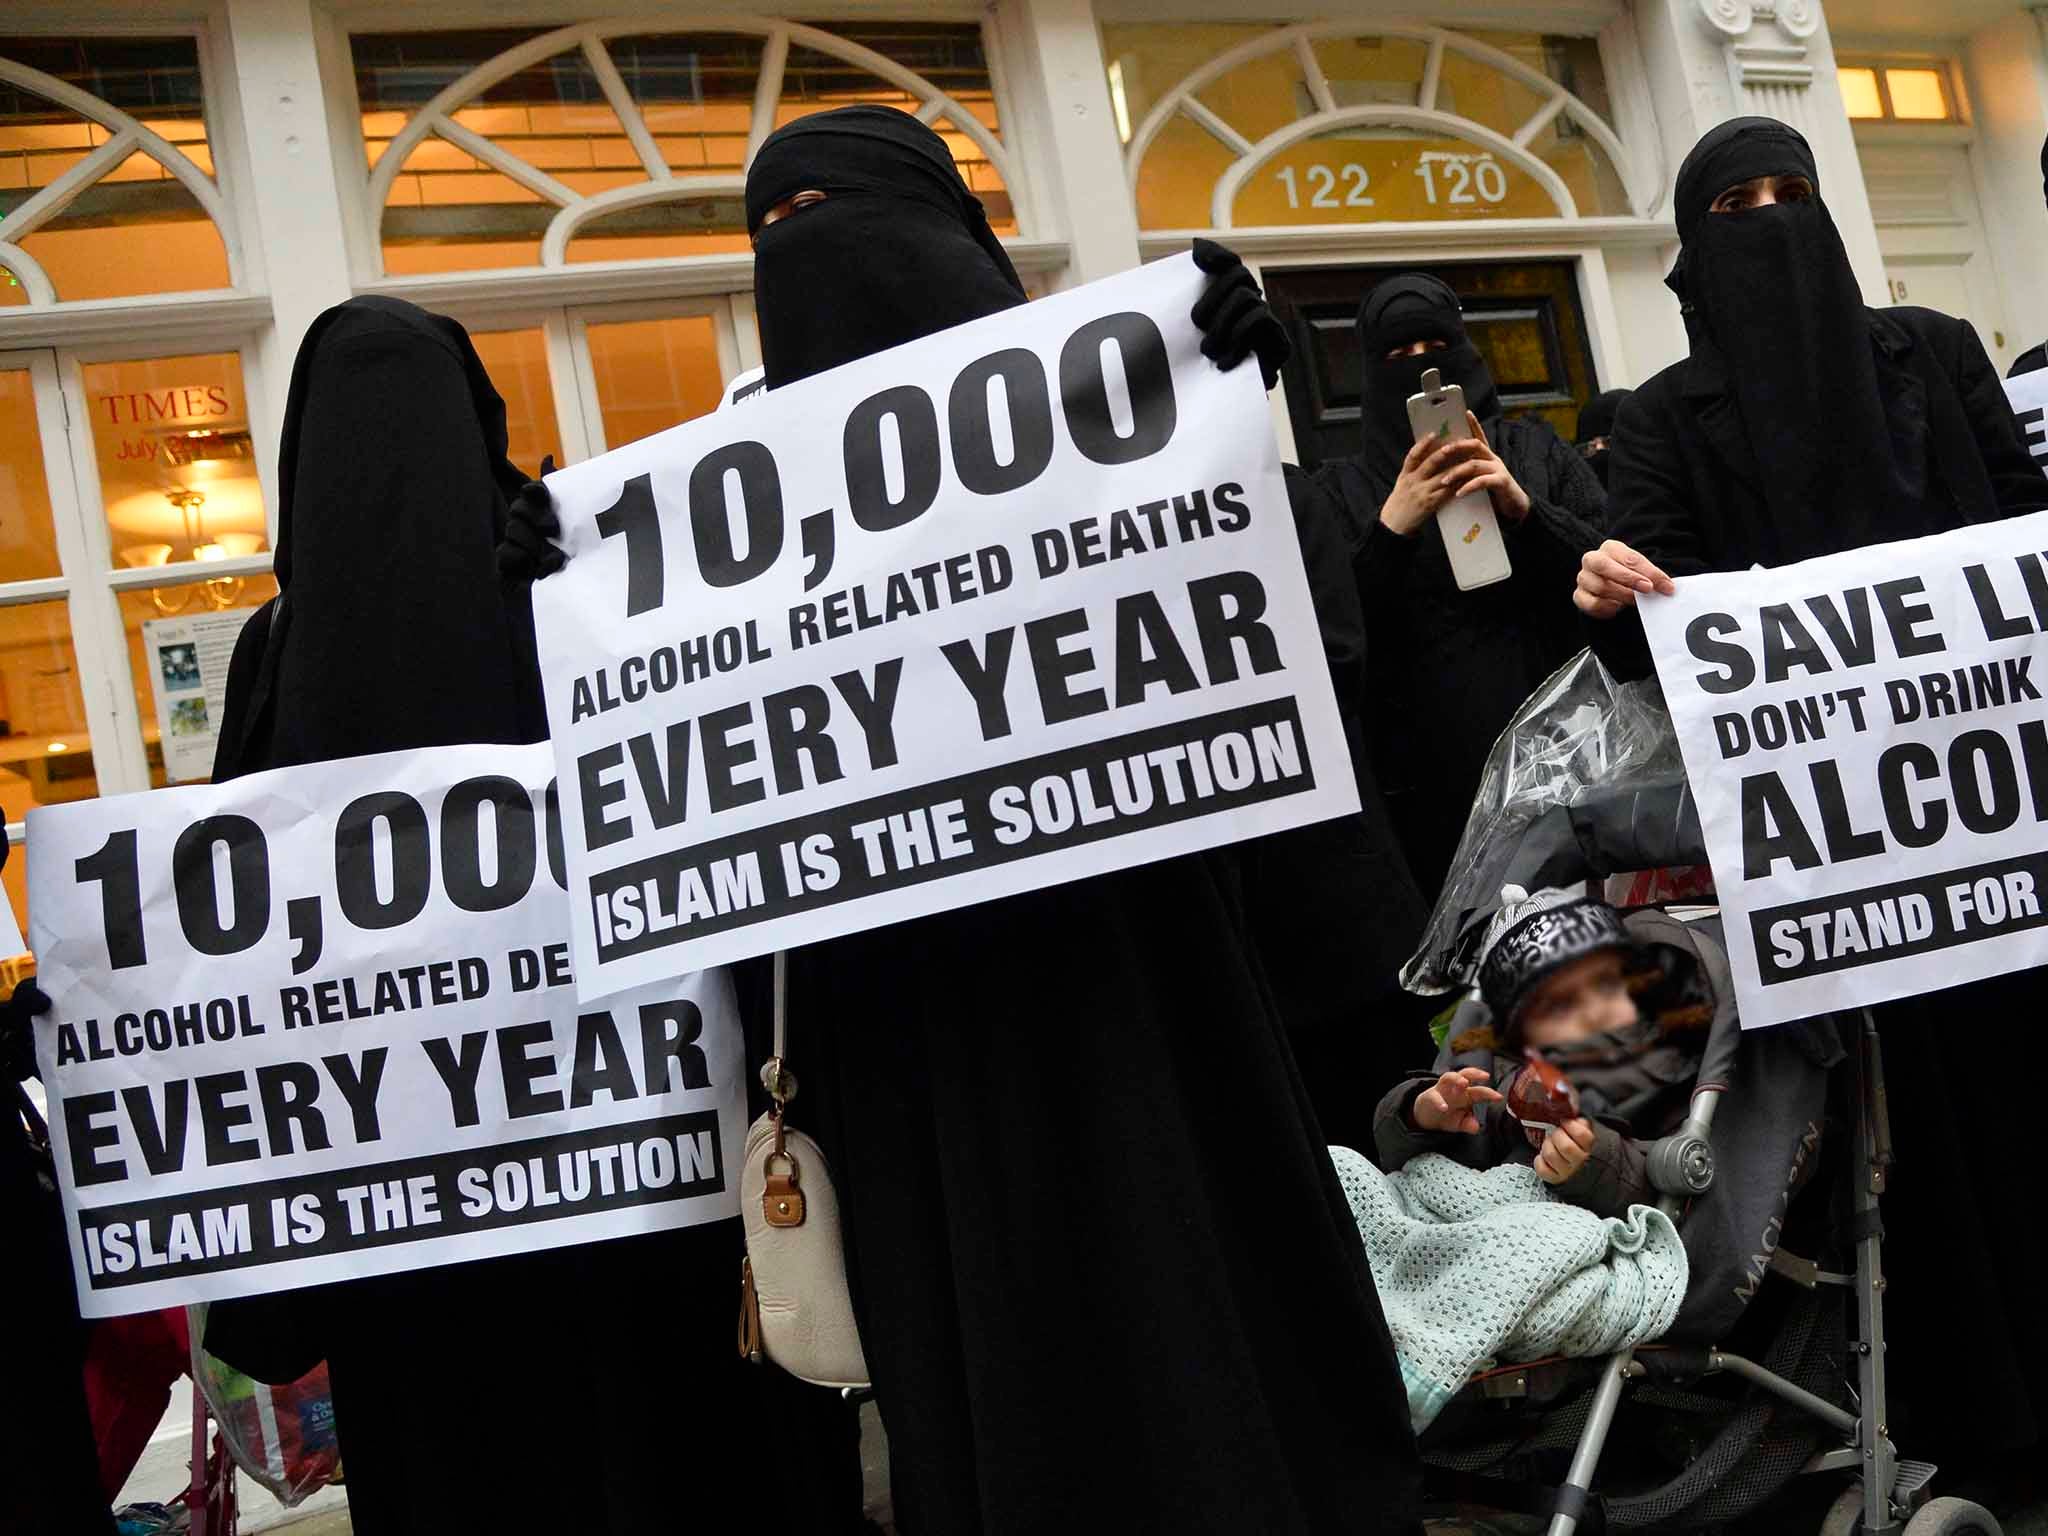 Al-Muhajiroun supporters at a 2013 protest organised by Anjem Choudary under the name the ‘Shariah Project’ in Brick Lane, London (Reuters)